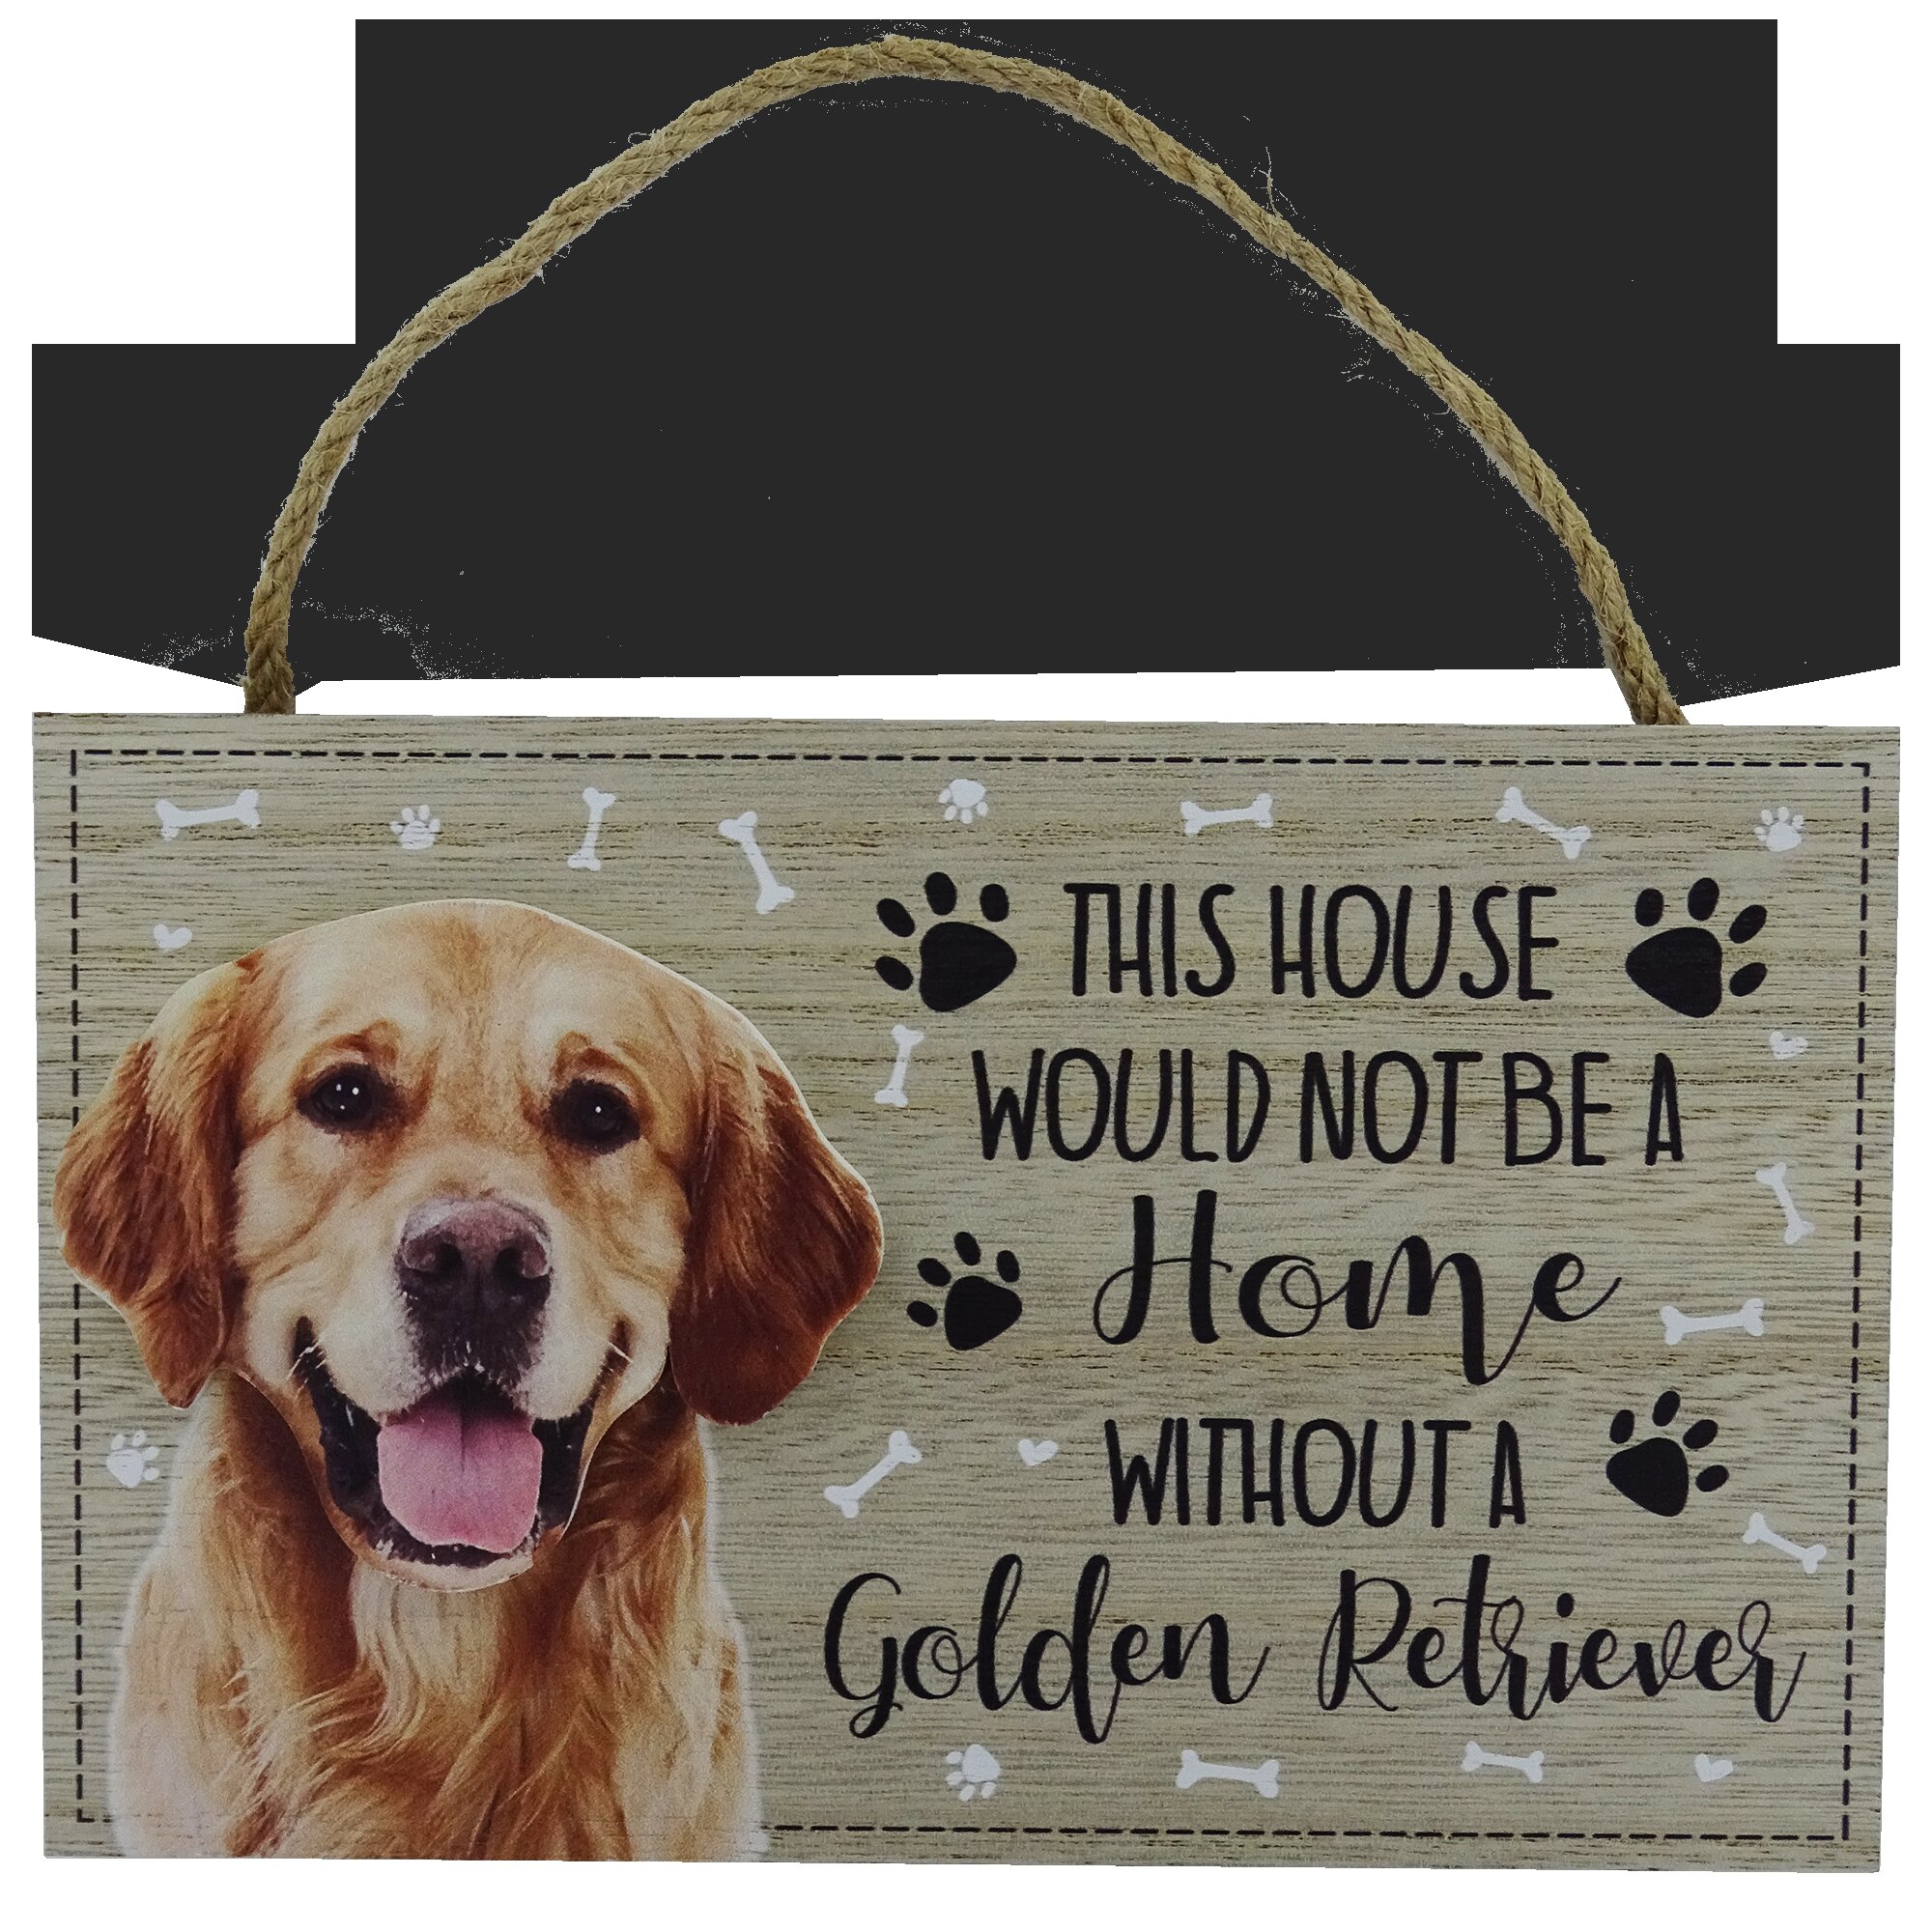 Breeze Decor G160180-BO 13 x 18.5 in. Dog Golden Retriever Happiness  Double-Sided Decorative, 1 - Dillons Food Stores